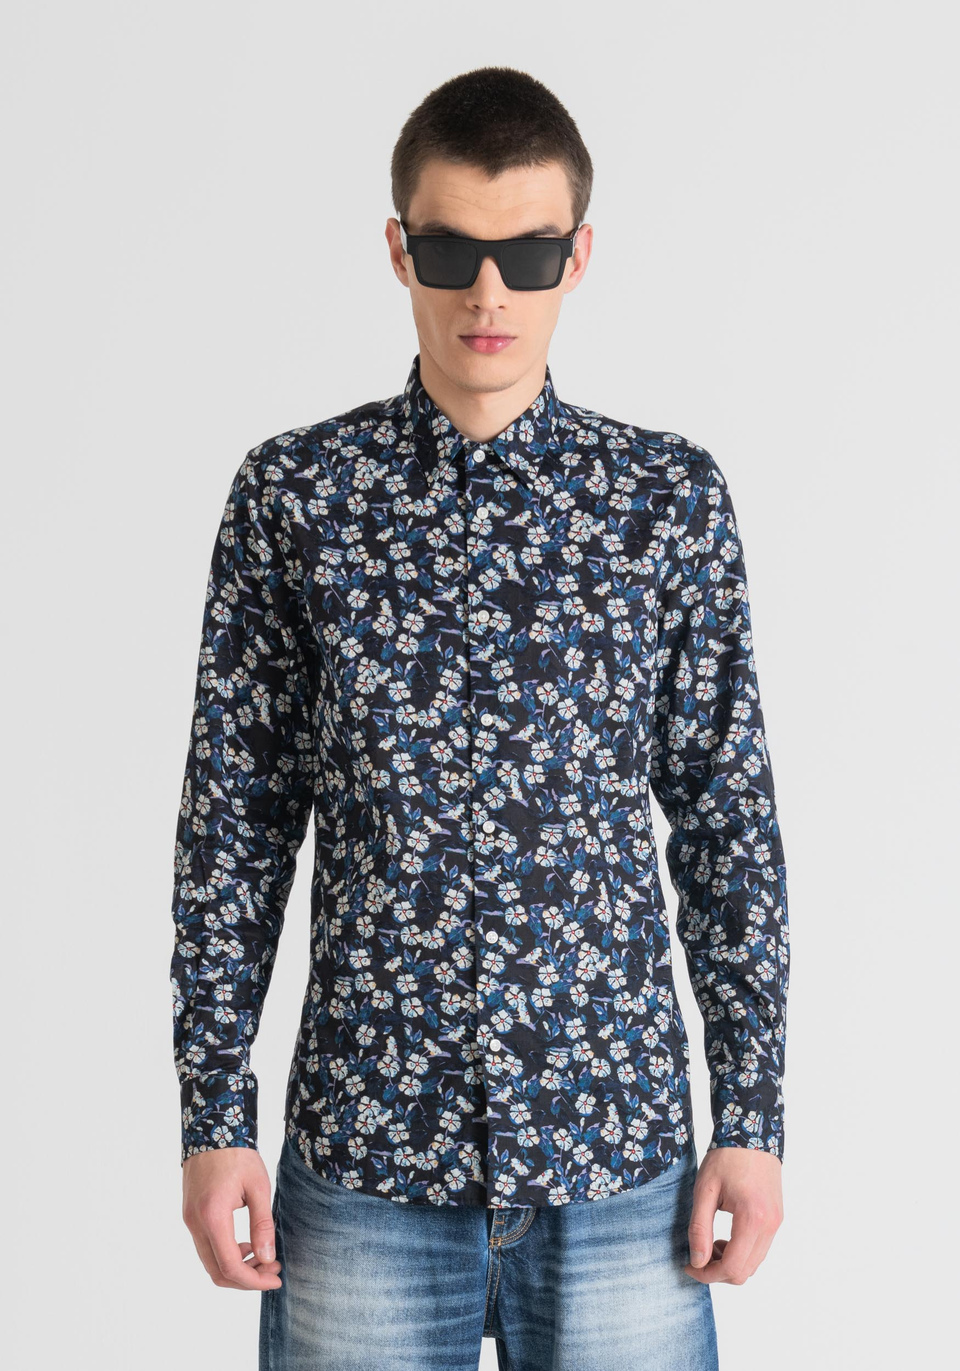 SLIM-FIT “NAPOLI” SHIRT IN 100% COTTON WITH AN ALL-OVER FLOWER PRINT PATTERN - Antony Morato Online Shop